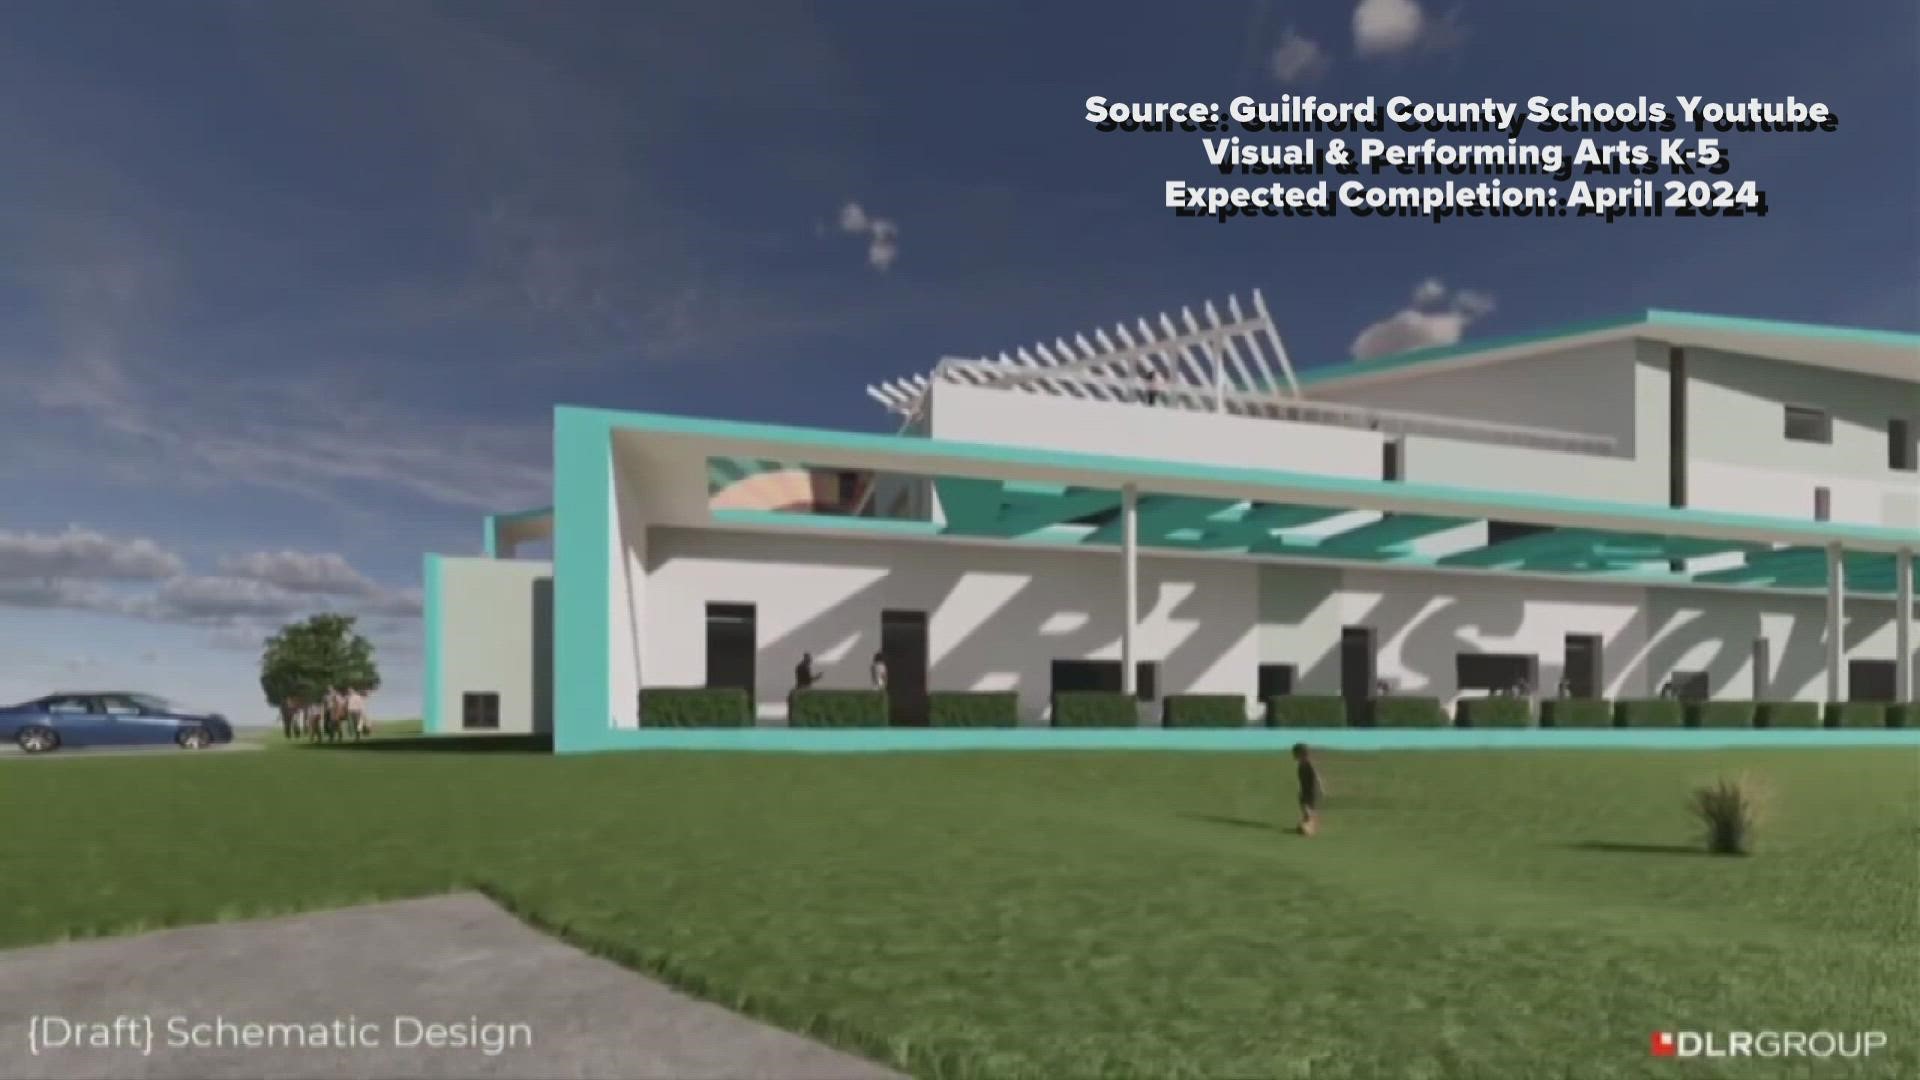 Guilford County Schools released new designs for several news schools that are set to be built over the next few years.